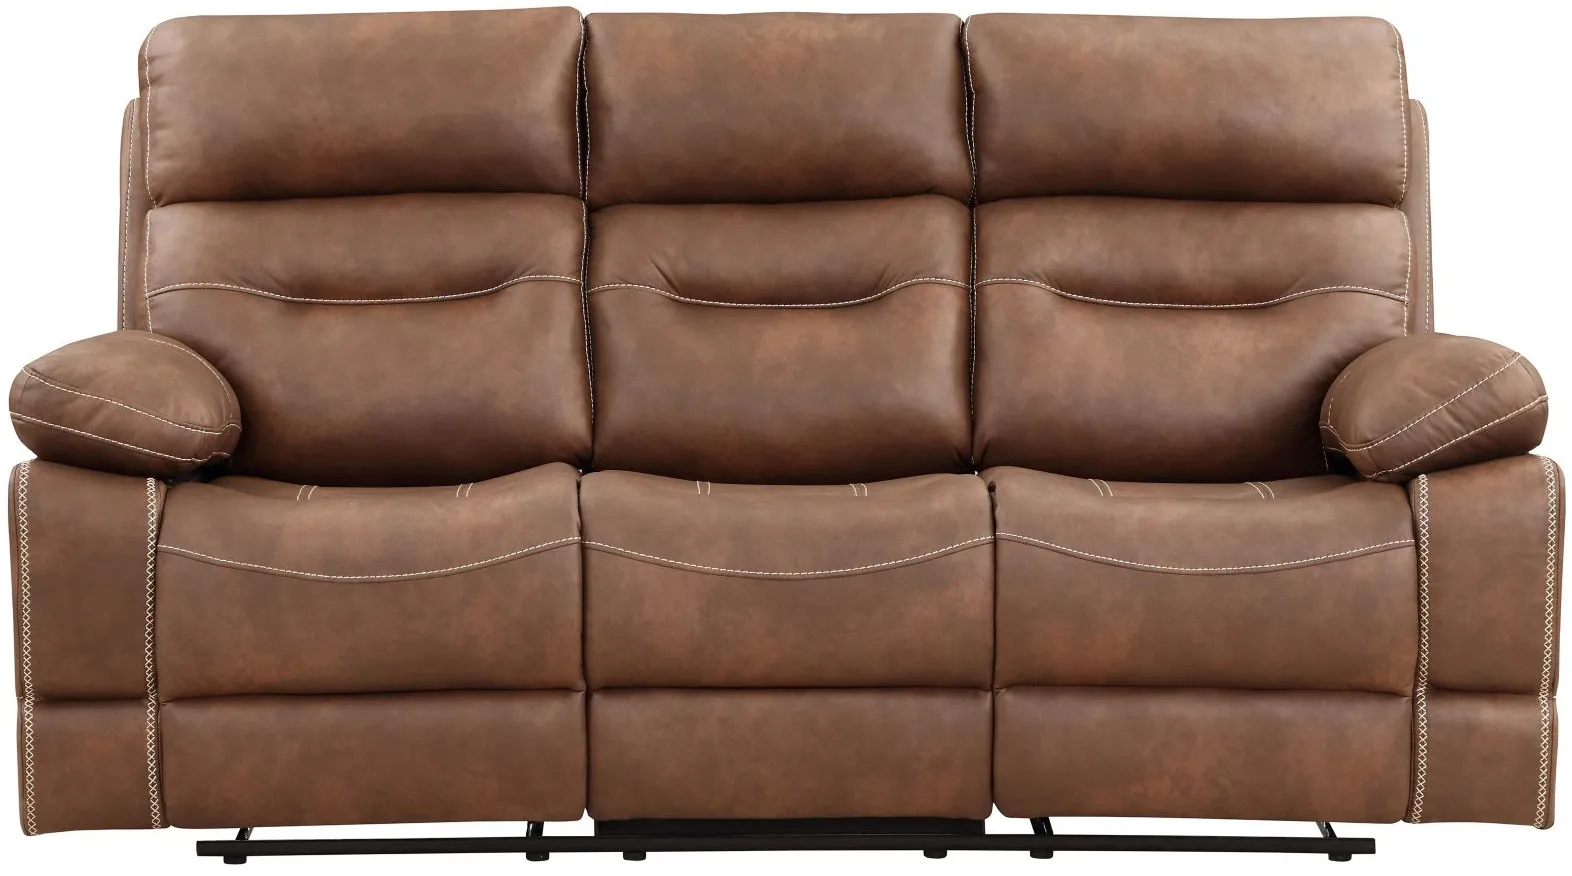 Rudger Reclining Sofa in Brown by Steve Silver Co.